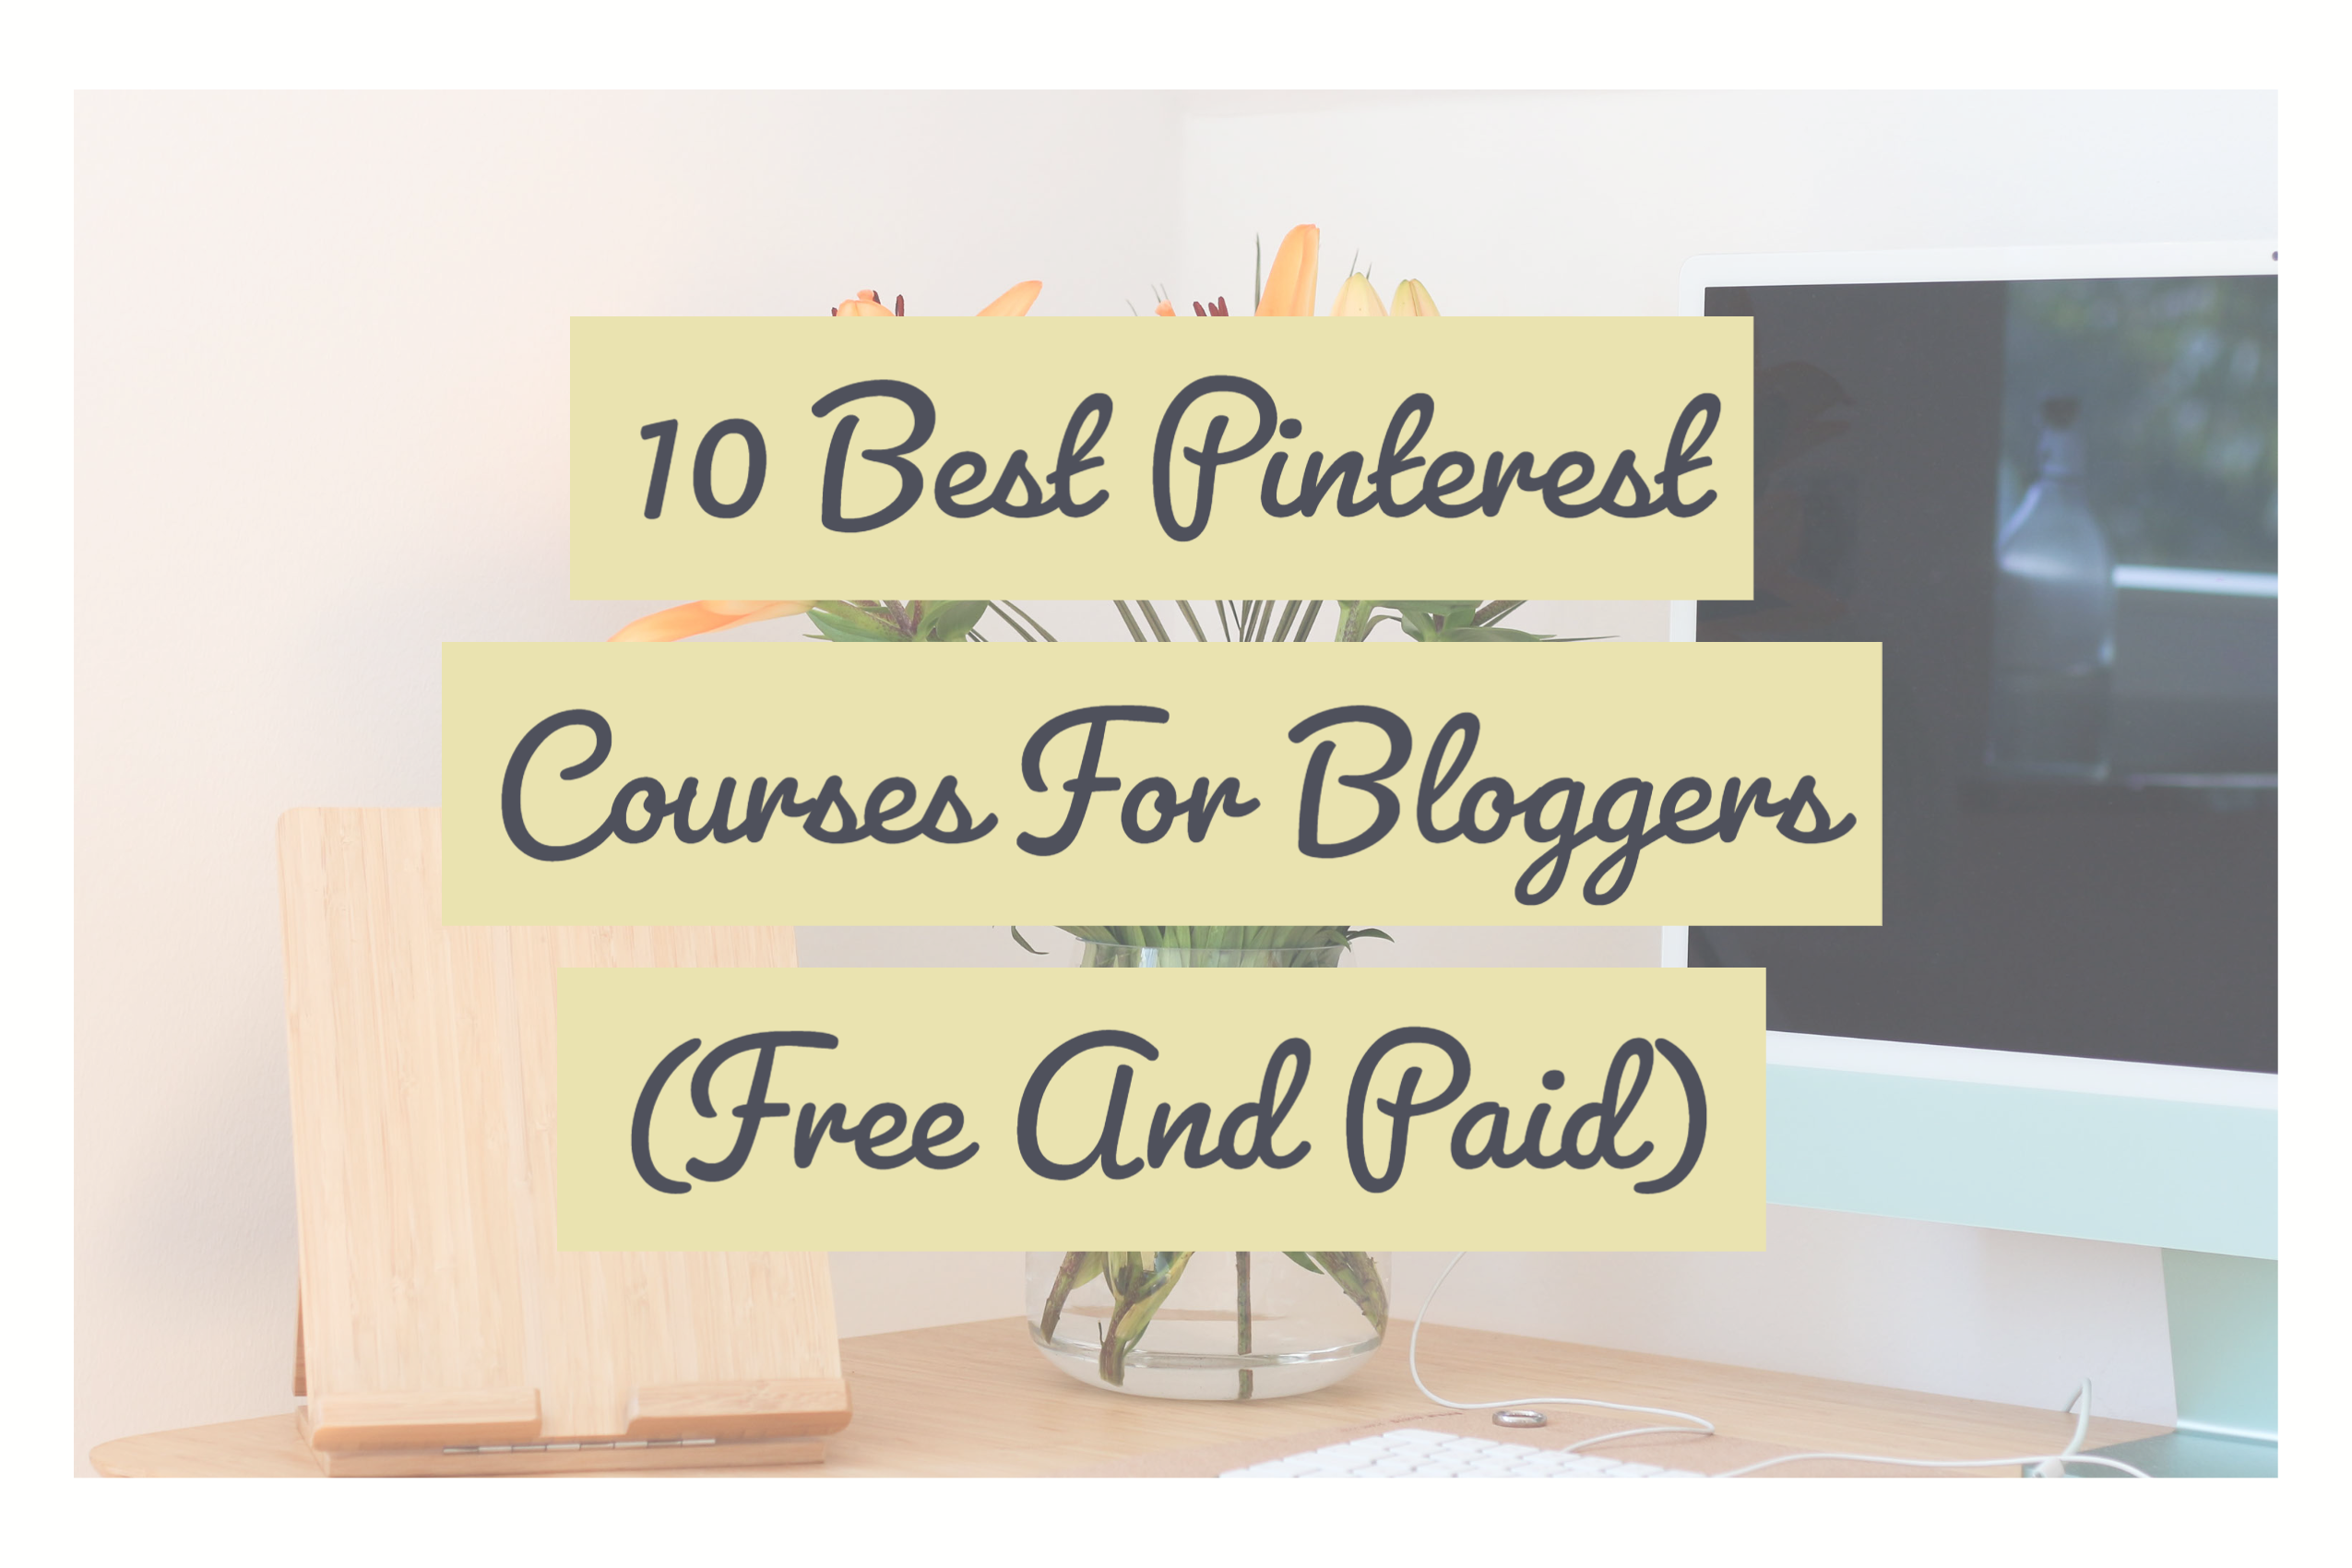 10 Best Pinterest Courses For Bloggers (Free And Paid)